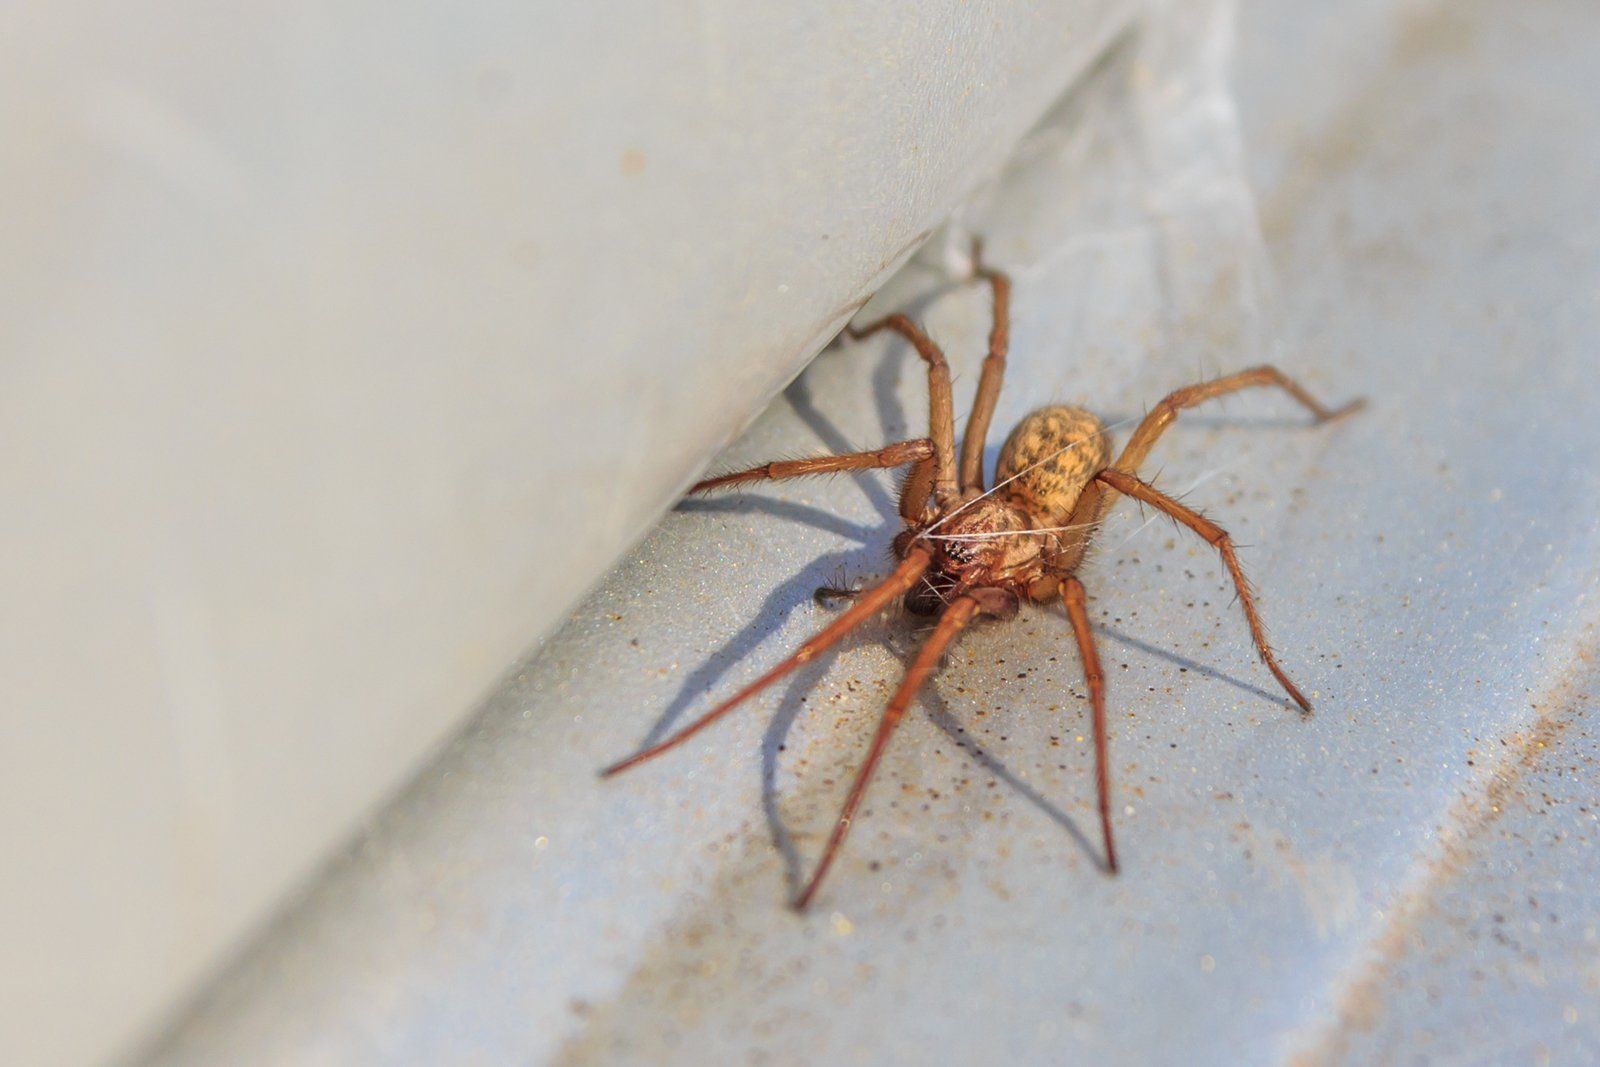 Image of nasty brown spider on the floor